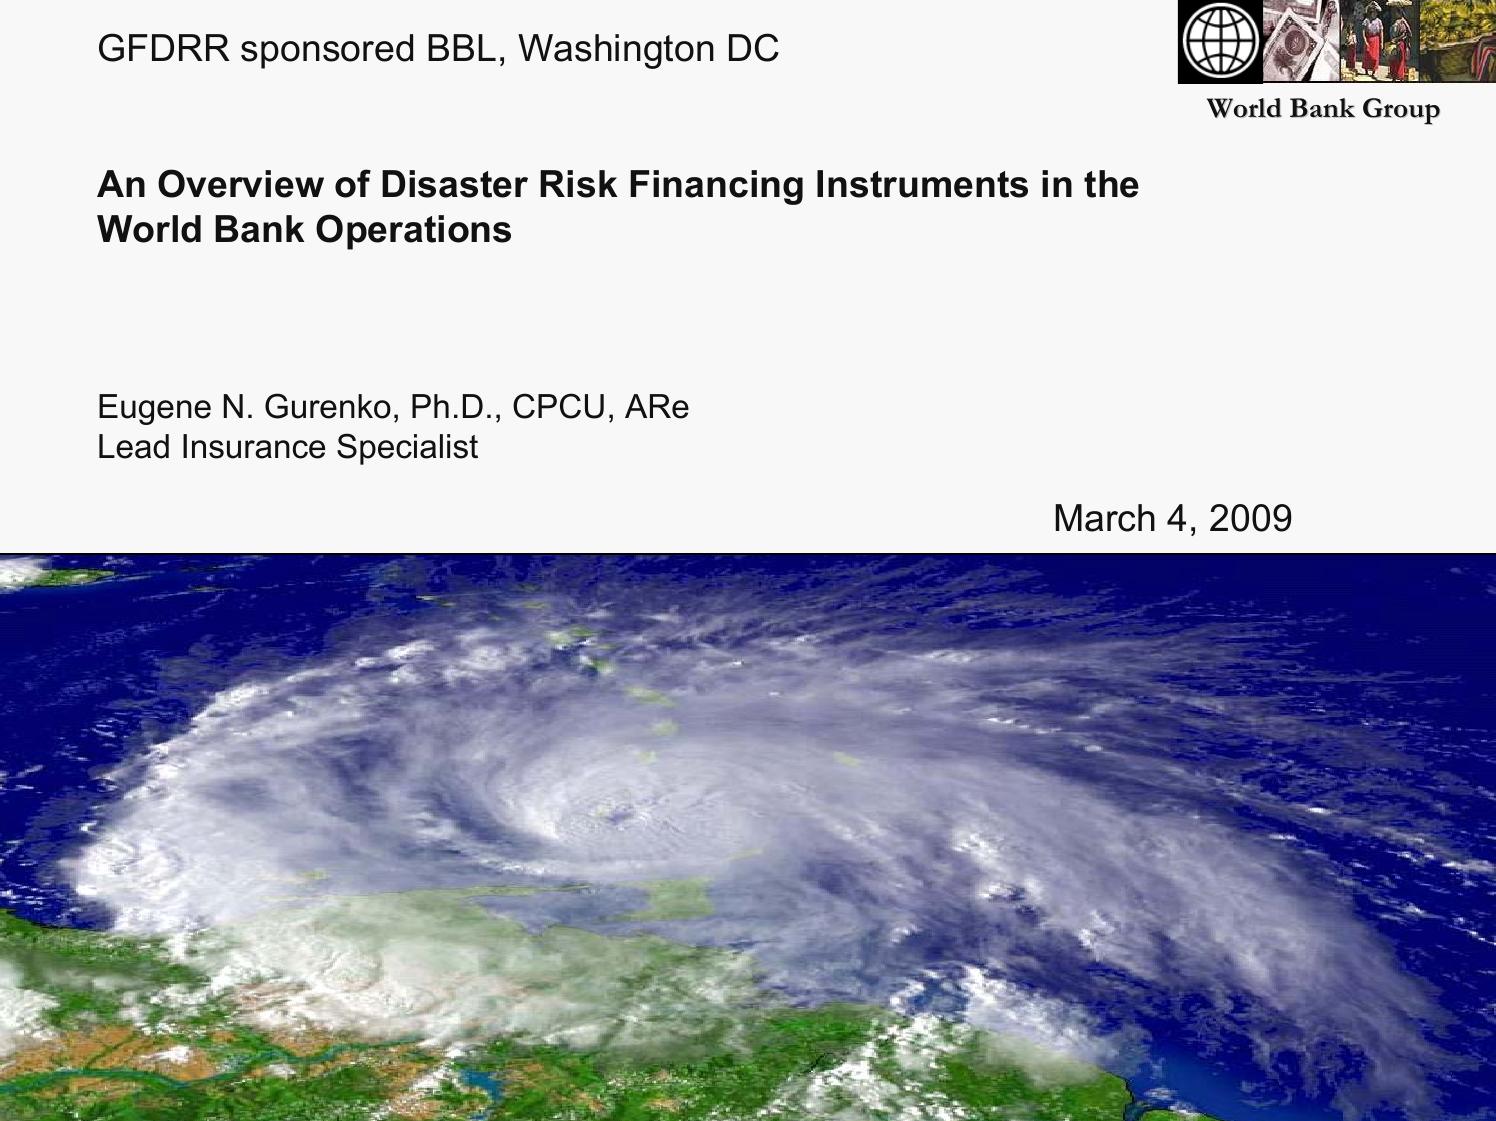 Financial instruments in Disaster Risk Management   IDB workshop for Executive Directors  Washington DC, USA   Catastrophe Insurance Programs in Developing Countries: Key Challenges and Opportunities  Eugene N. Gurenko, Ph.D., CPCU, ARe  Lead Insurance Specialist